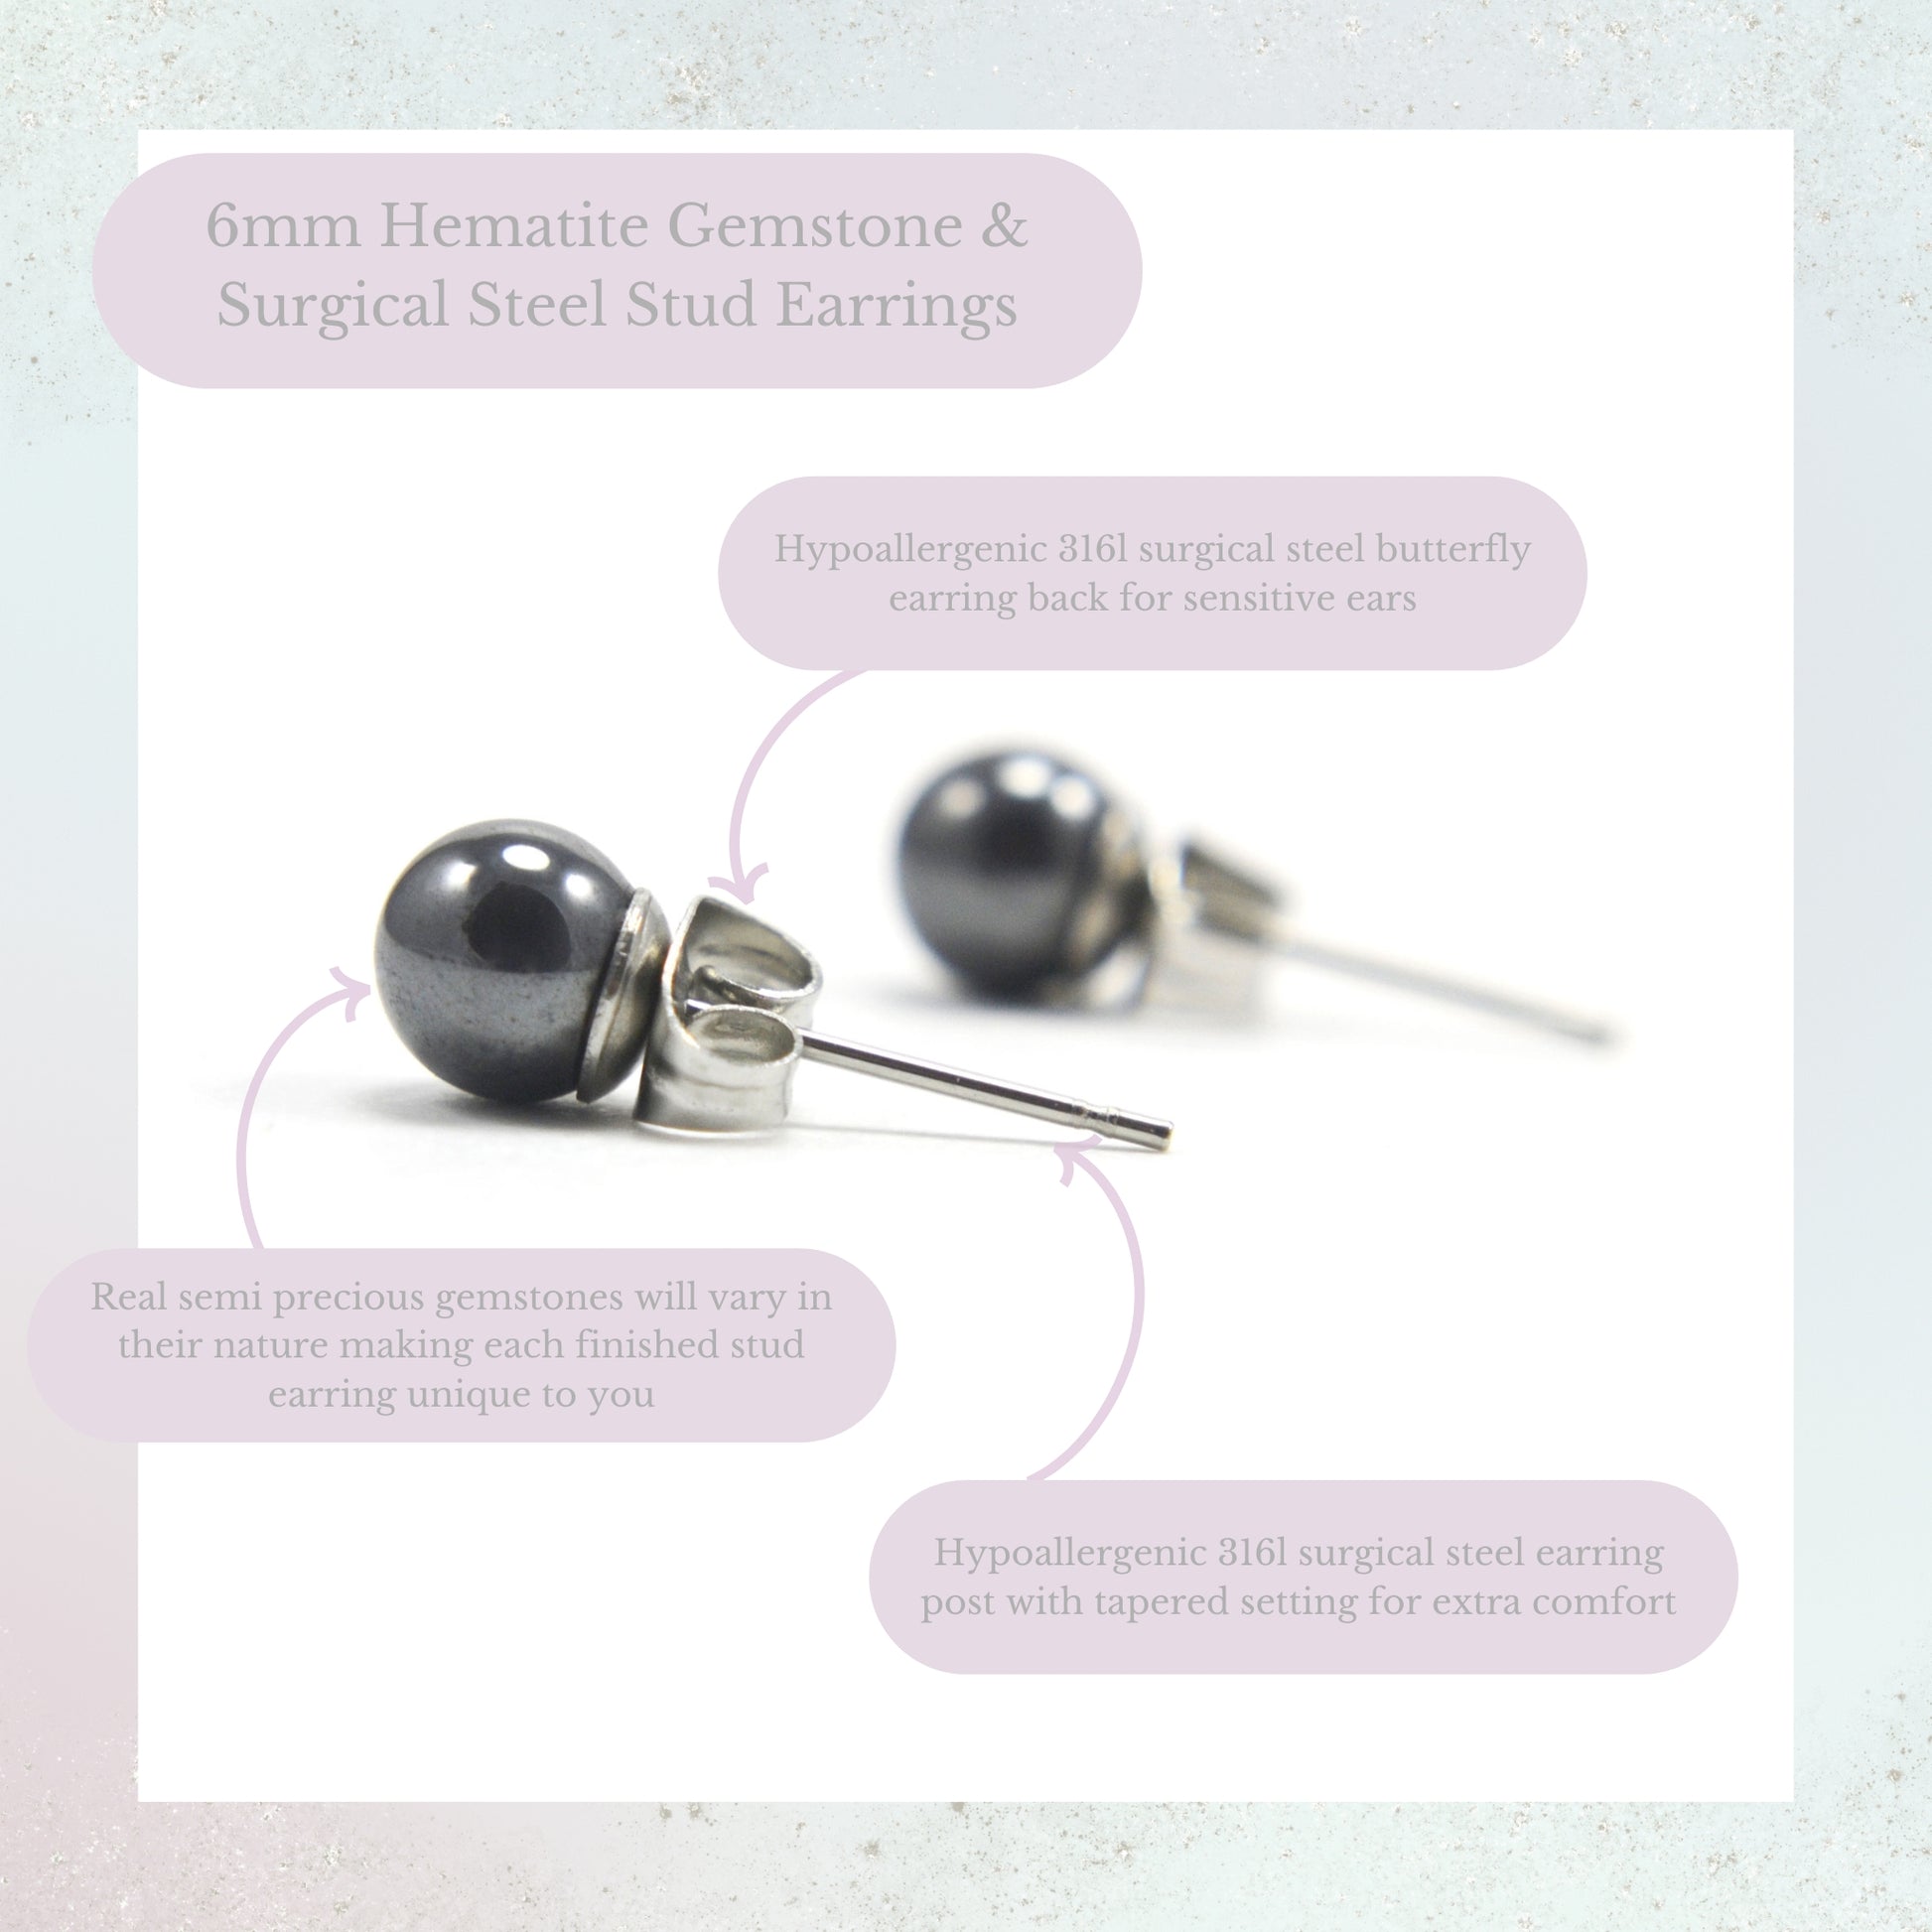 6mm Hematite Gemstone & Surgical Steel Stud Earrings Product Information Graphic